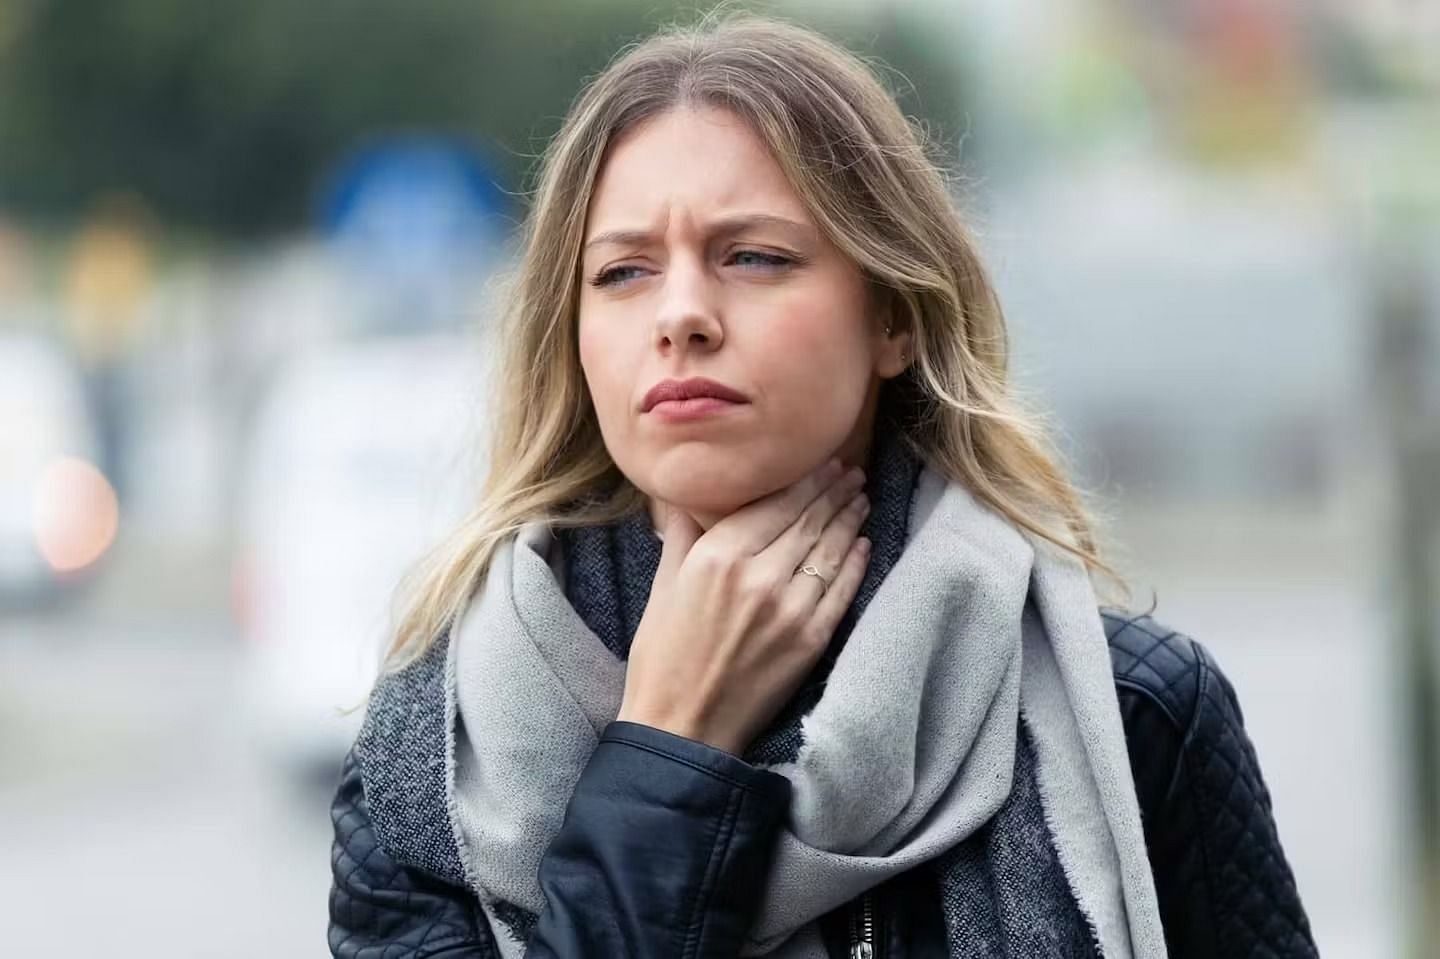 Itchy throat remedies to alleviate discomfort (Image via Getty Images)